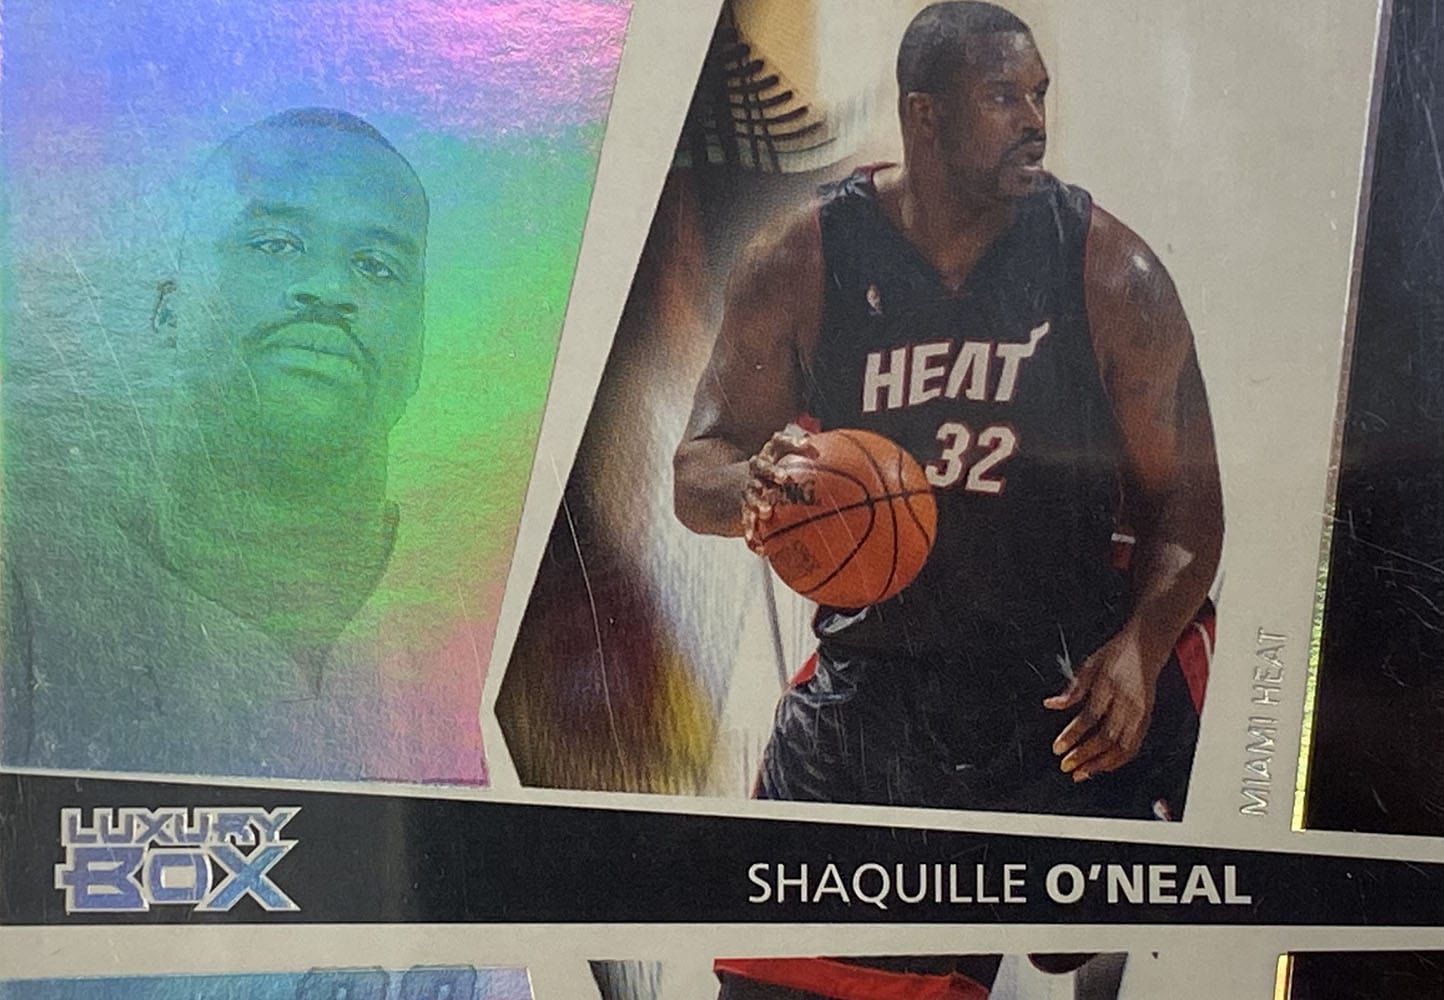 Topps - Shaquille O'Neal